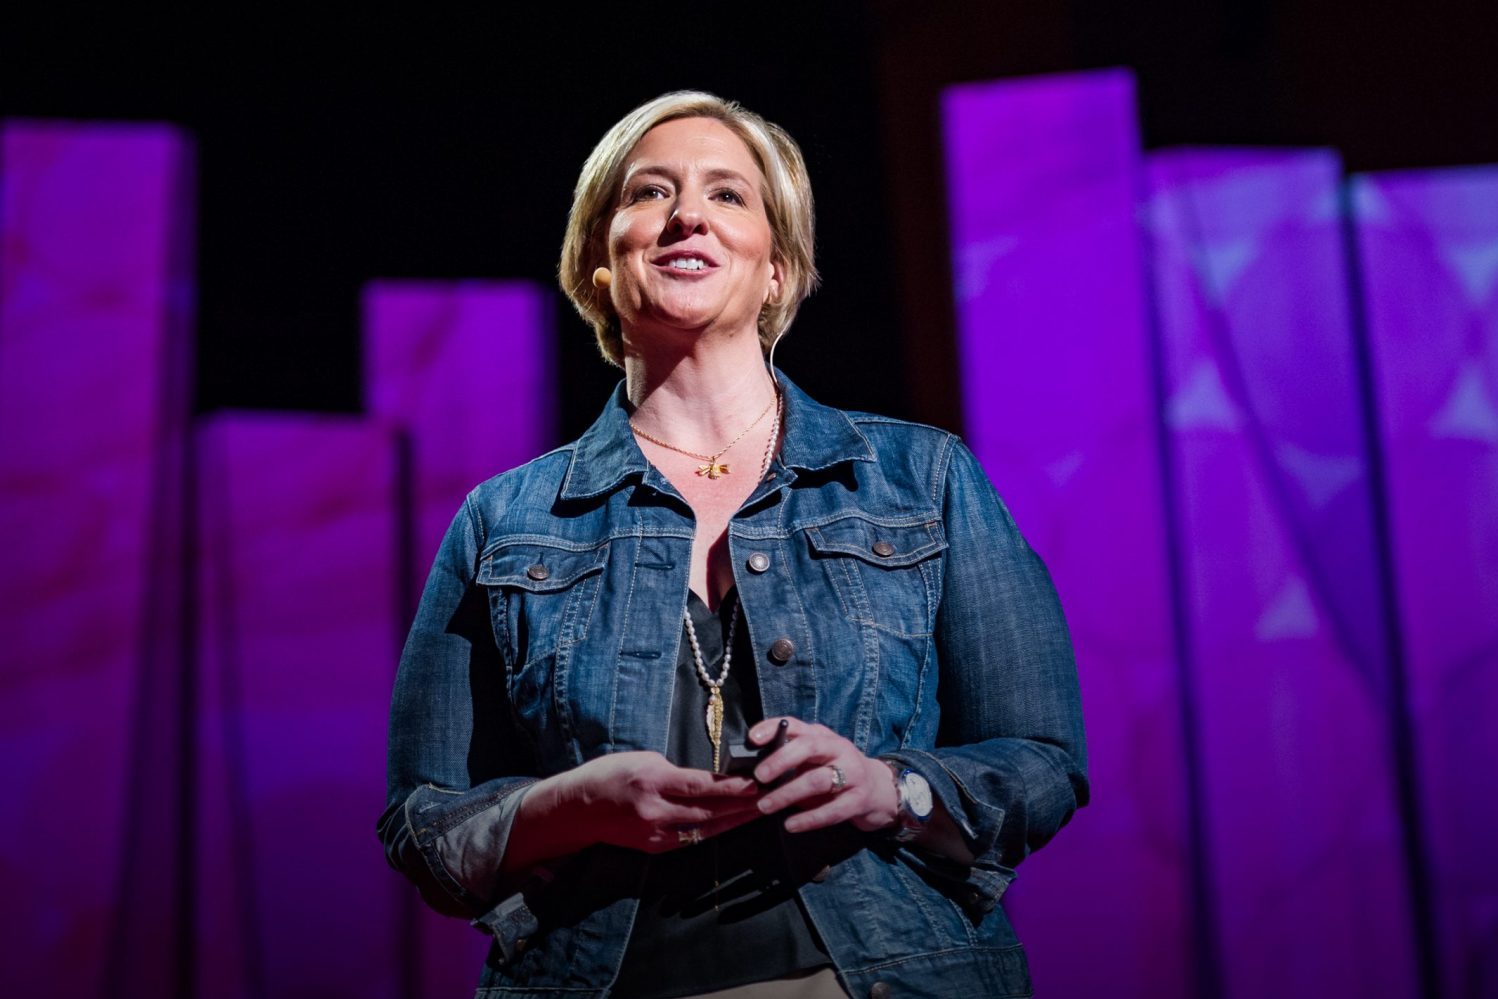 Brené Brown, host of the podcast "Unlocking Us," speaking at a TED Talk